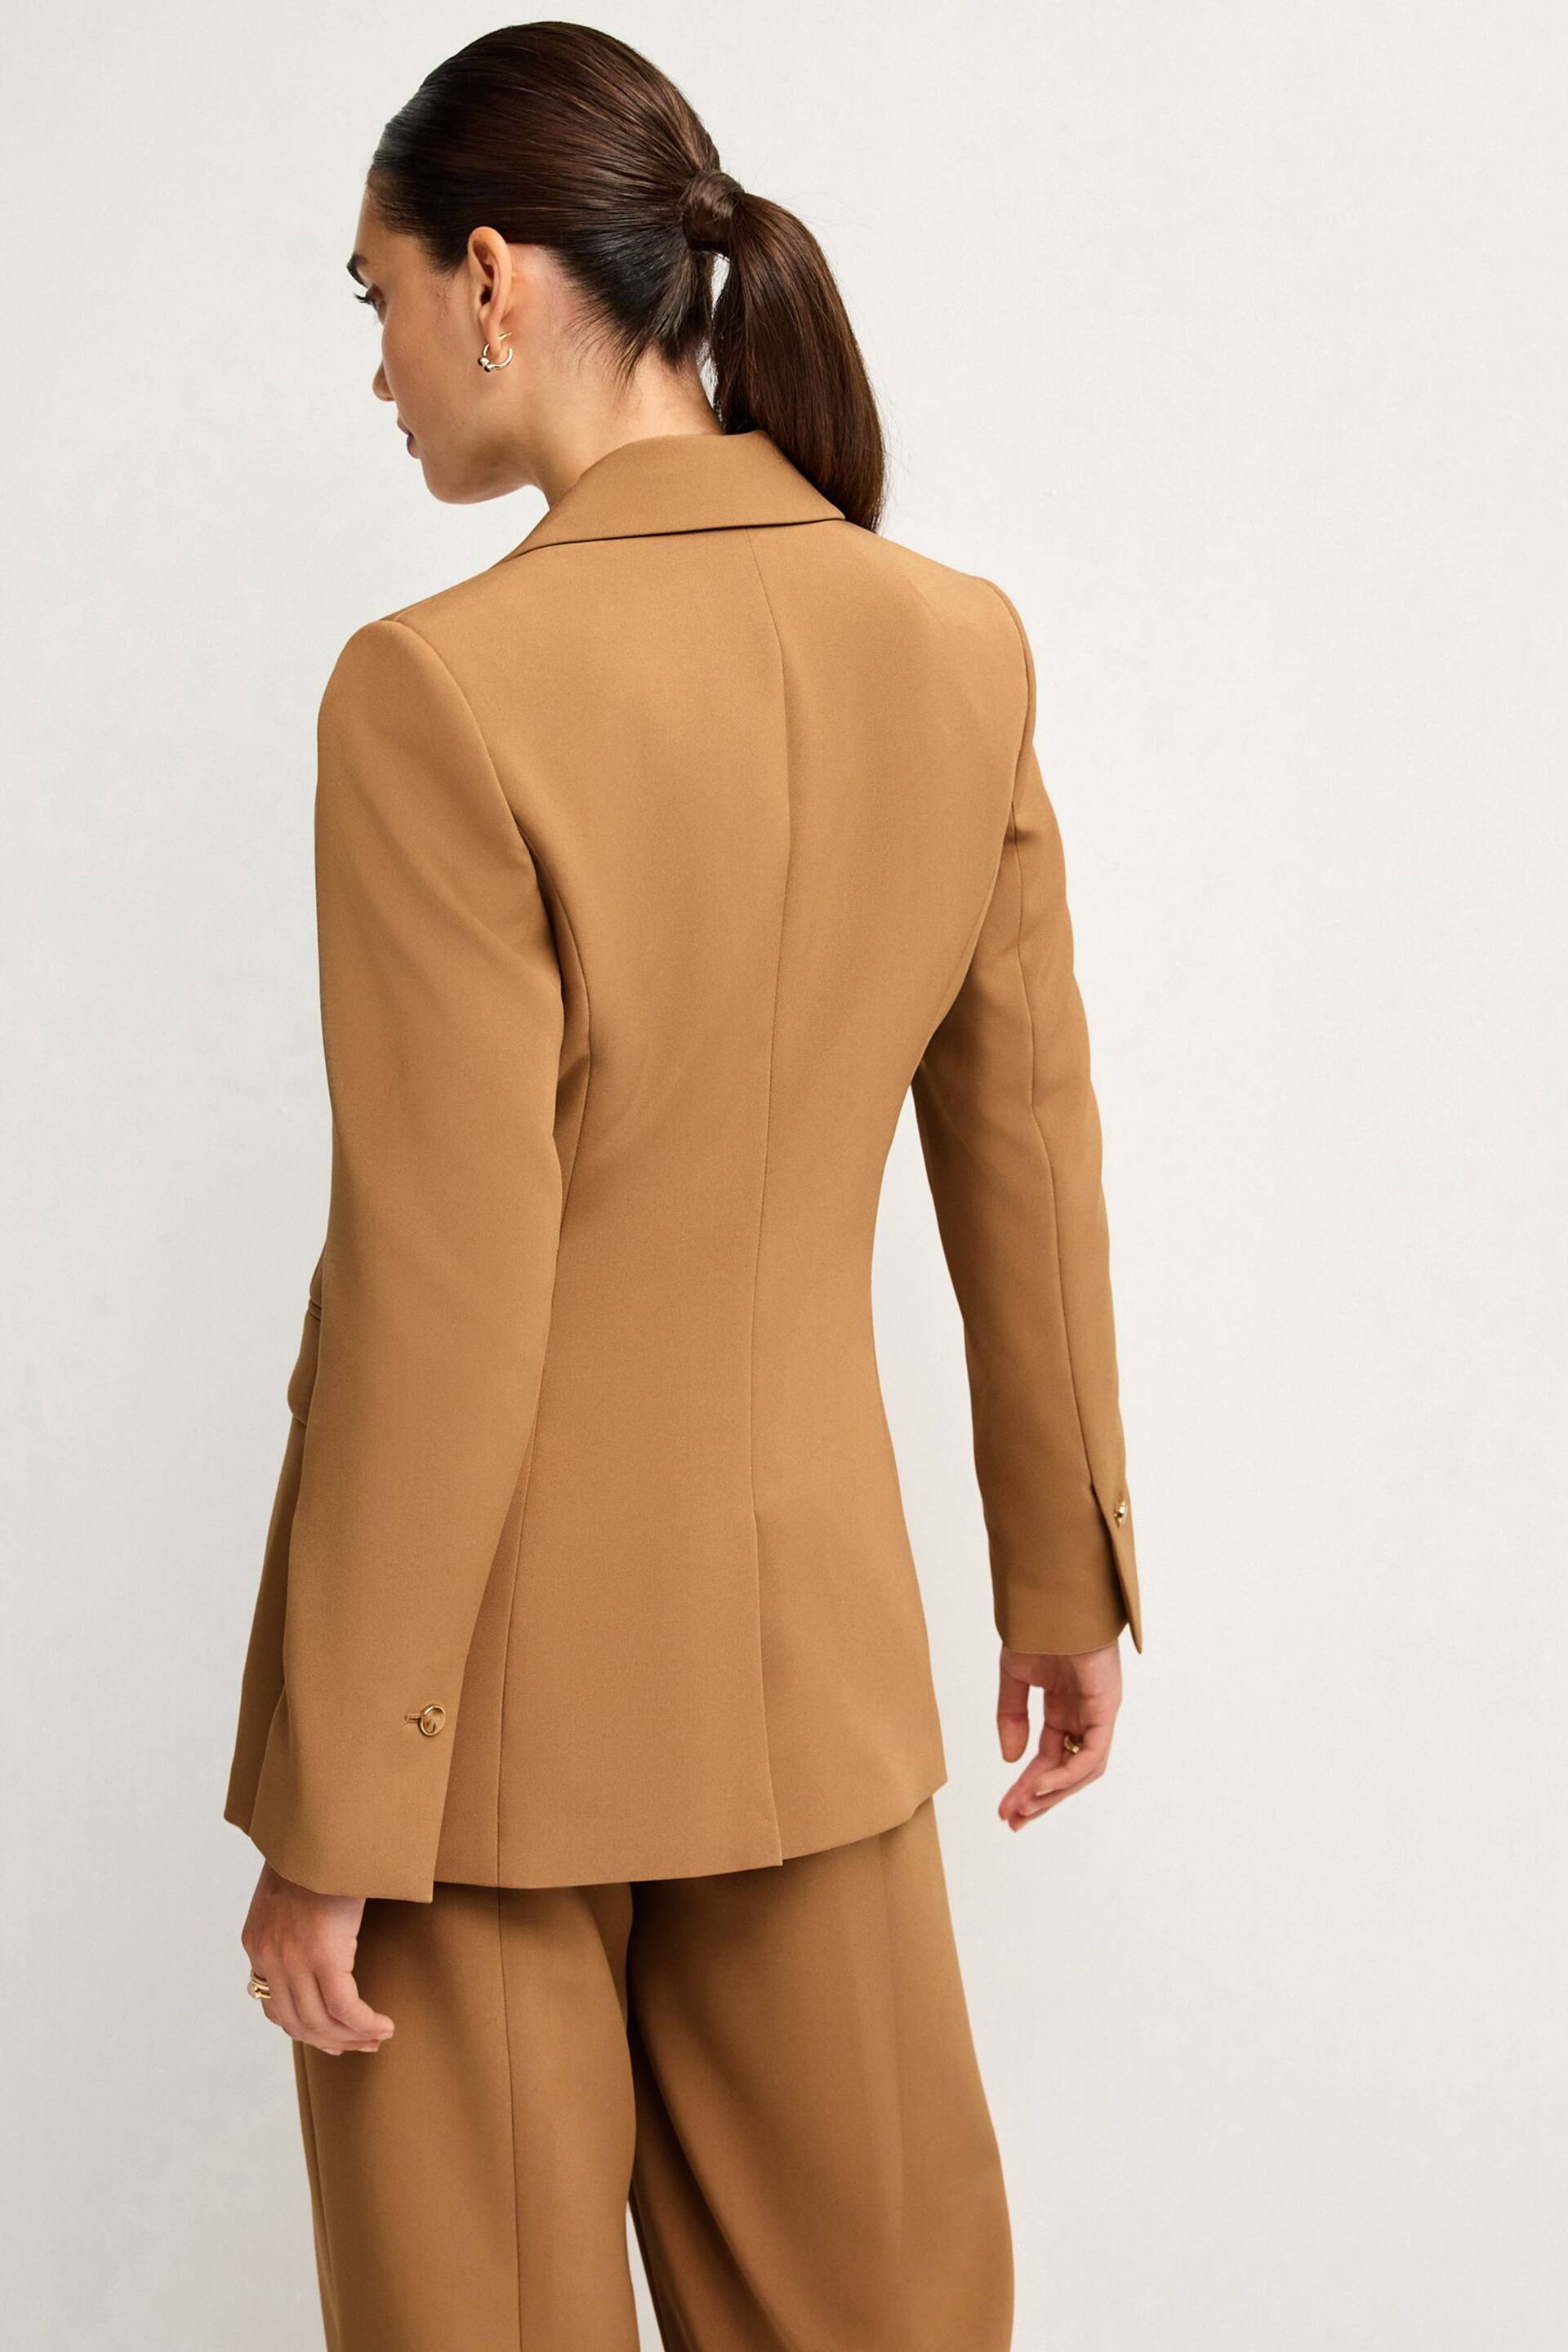 Camel Brown Tailored Crepe Edge to Edge Fitted Blazer - Image 4 of 5